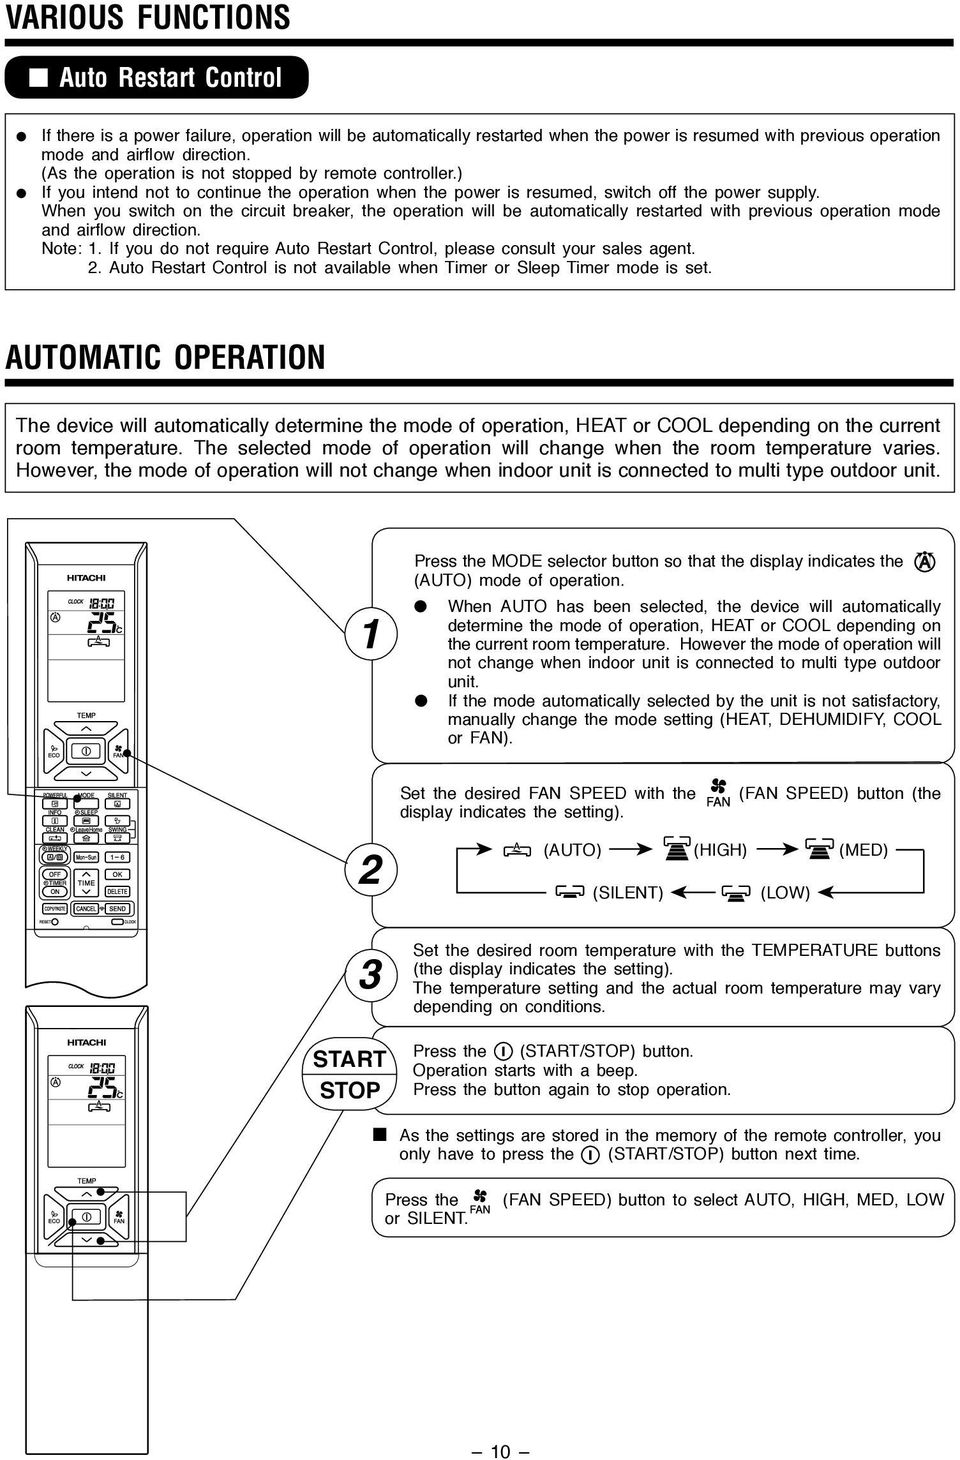 When you switch on the circuit breaker, the operation will be automatically restarted with previous operation mode and airflow direction. Note:.